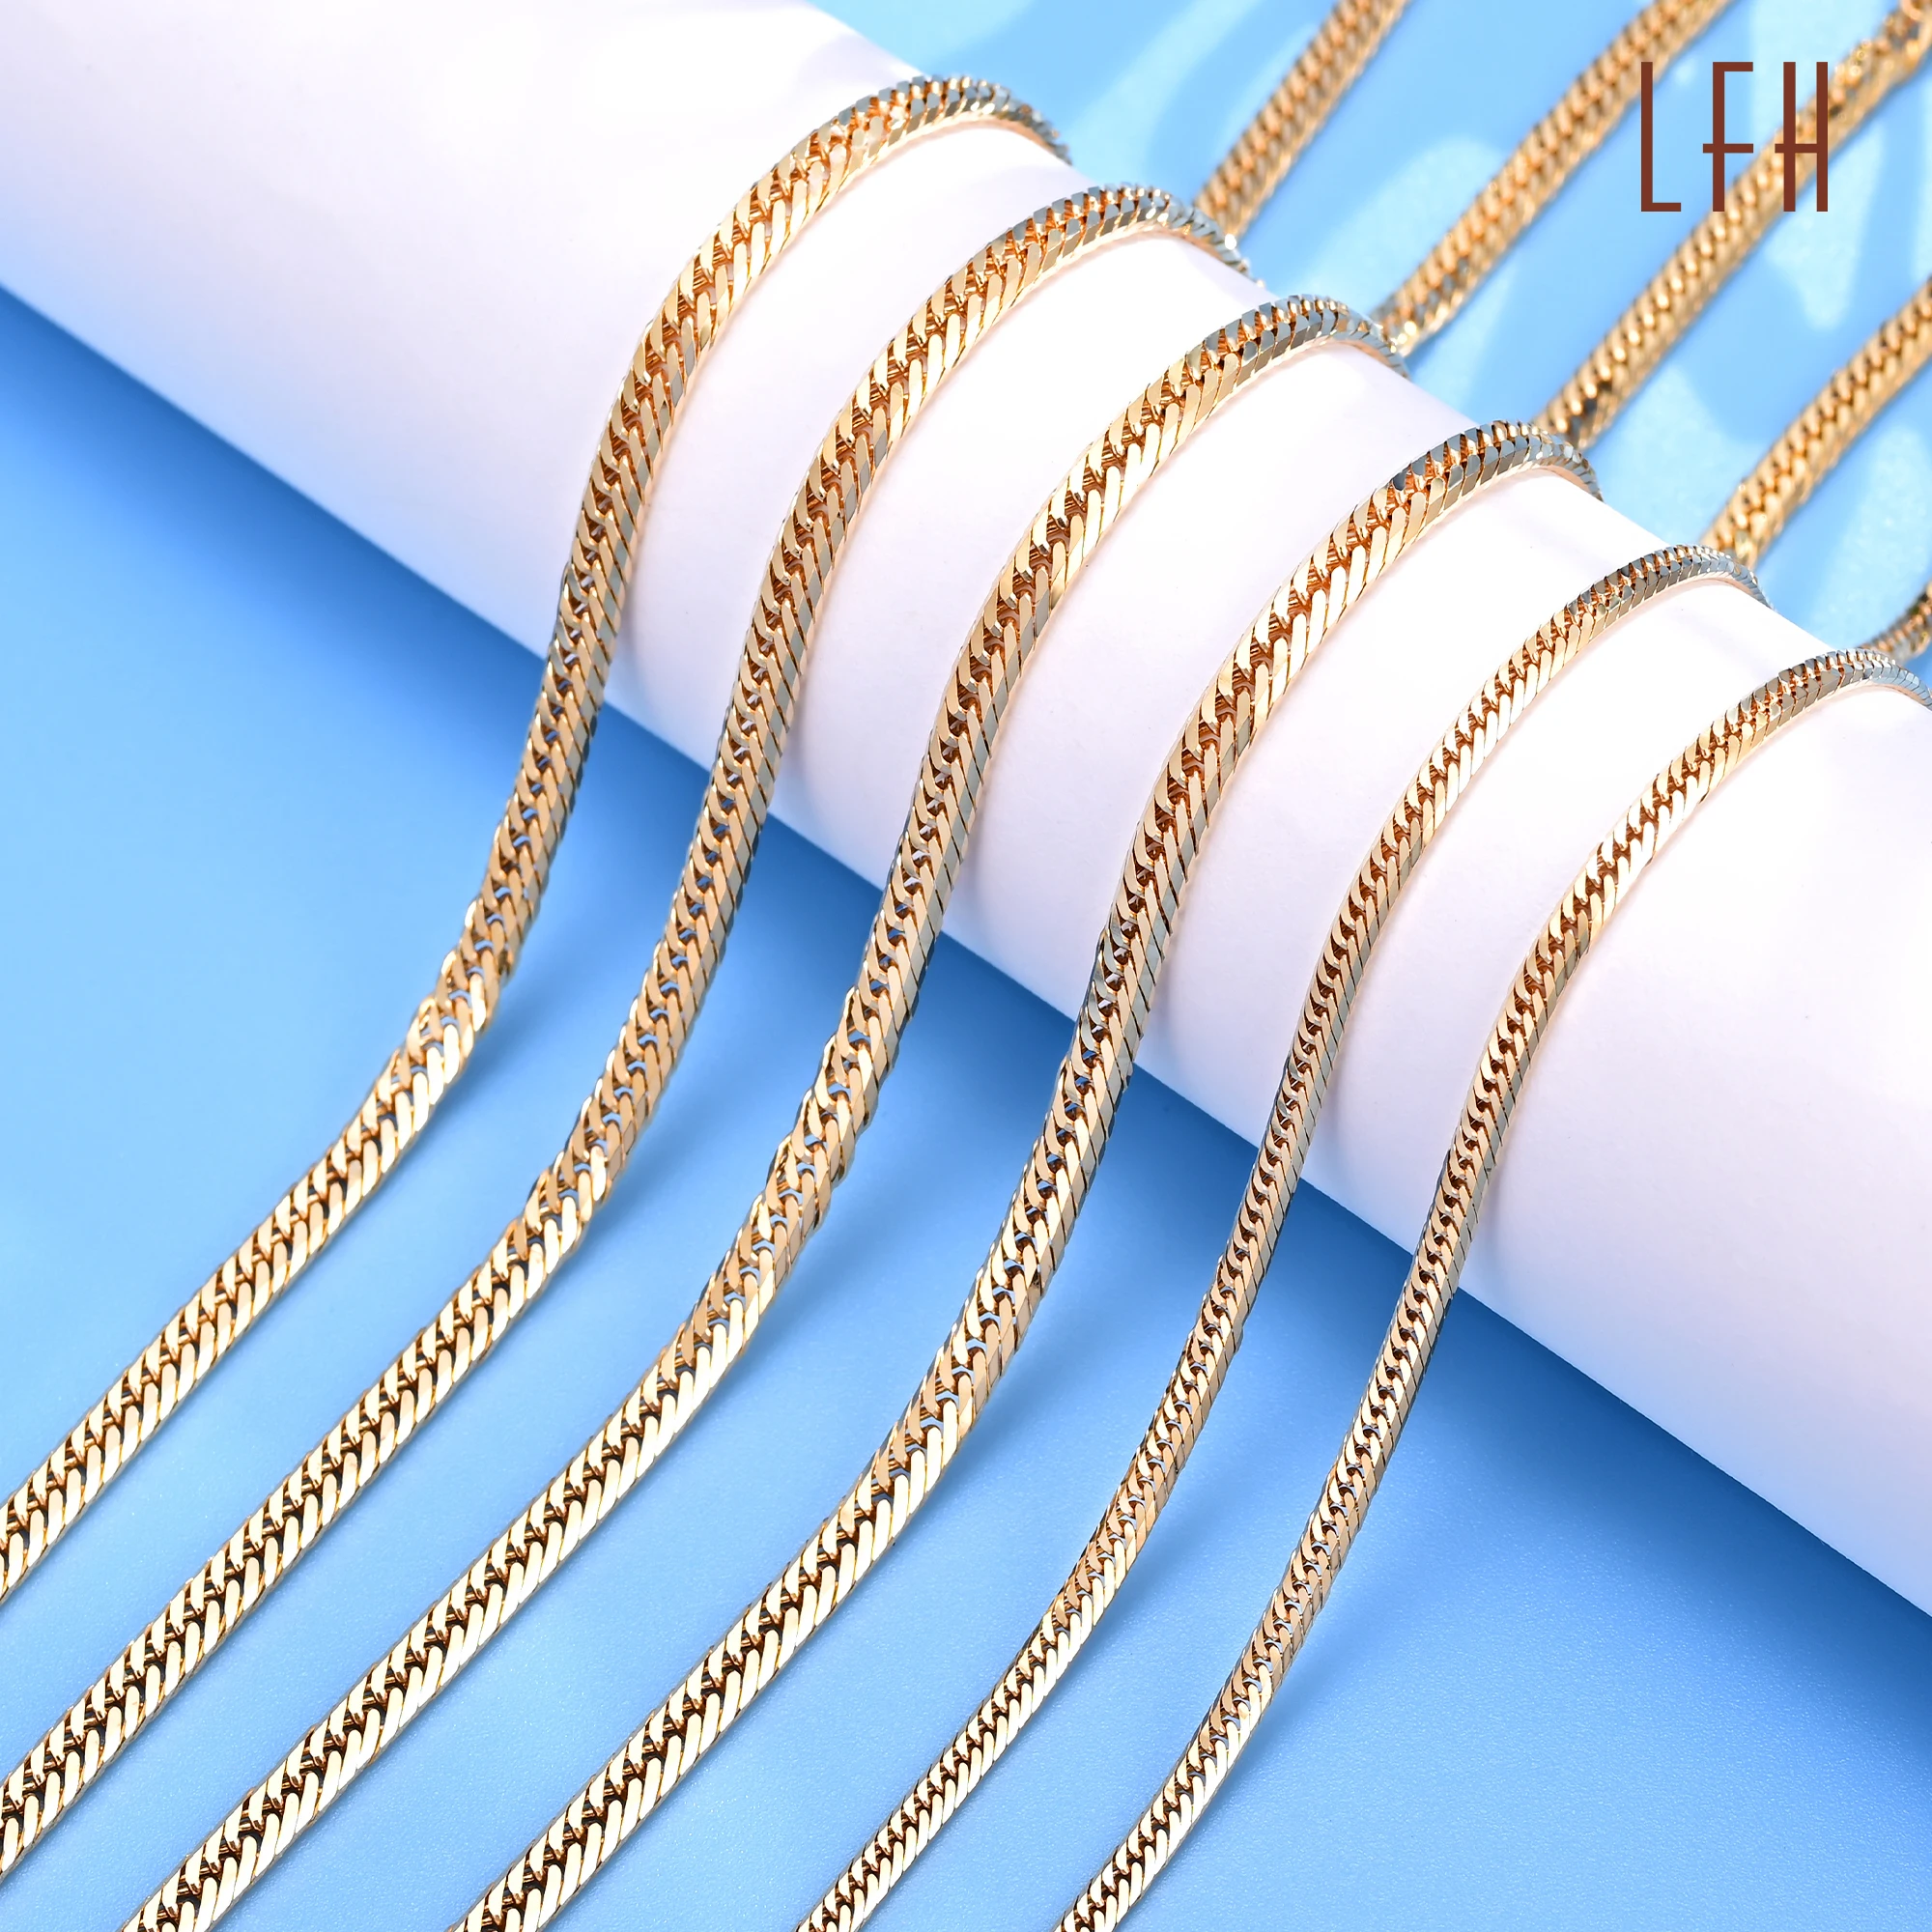 Au 750 Solid Necklaces Real Gold Cuban Link Chain Real Gold Jewelry 18k ...